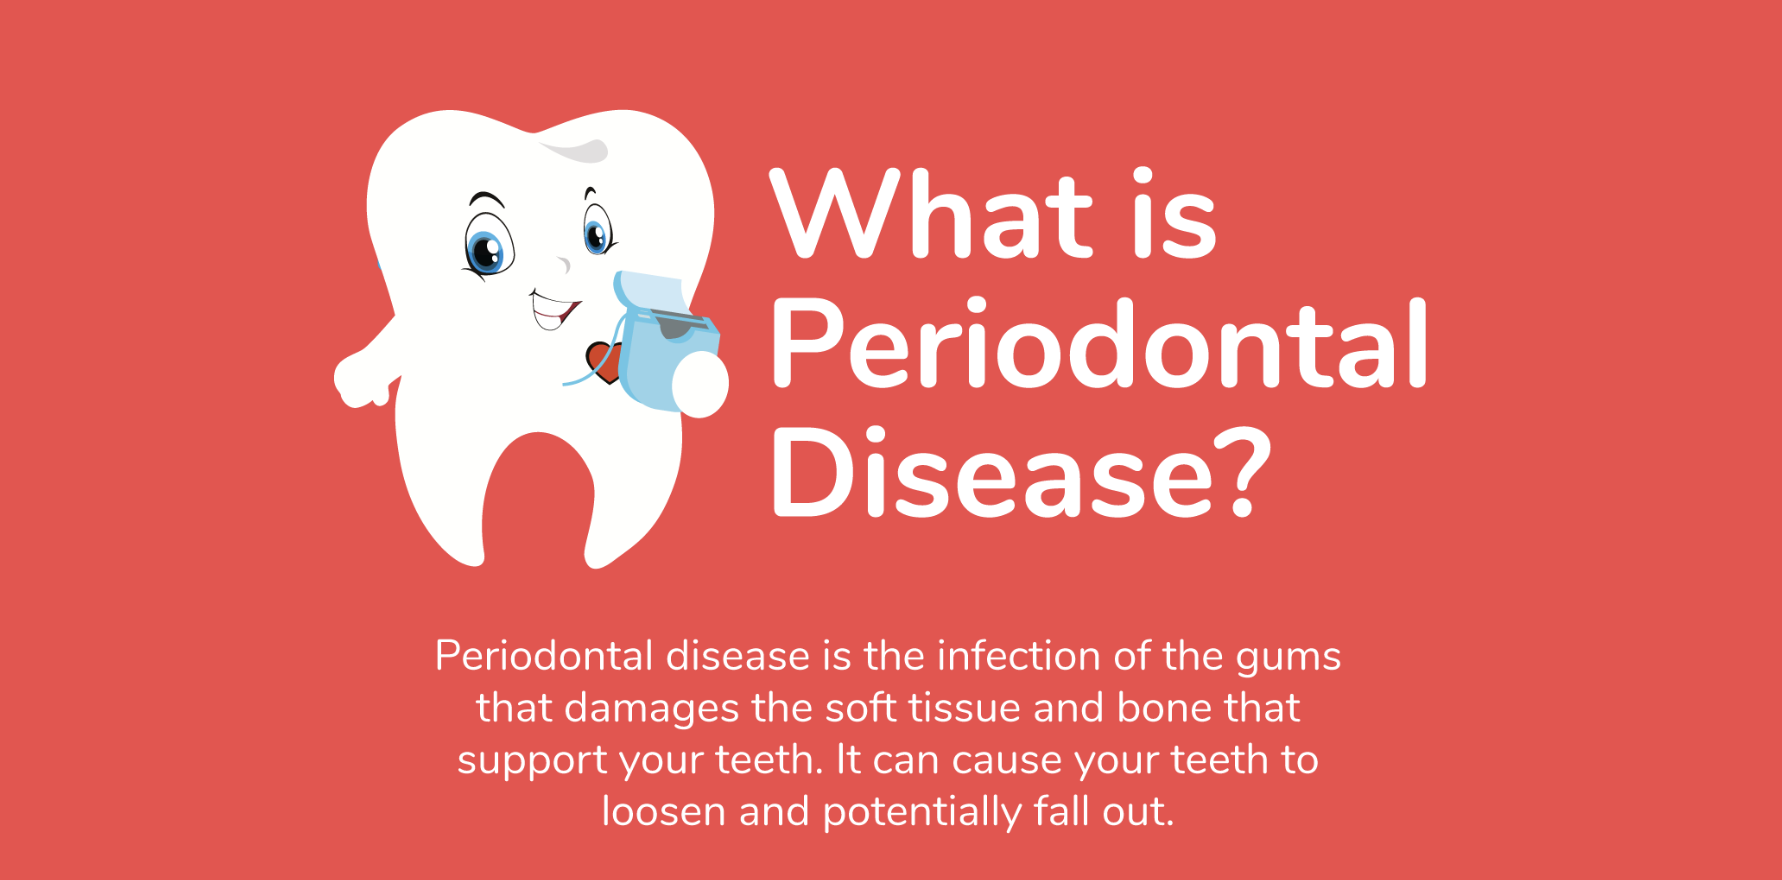 Featured image for “What is Periodontal Disease? An Infographic”